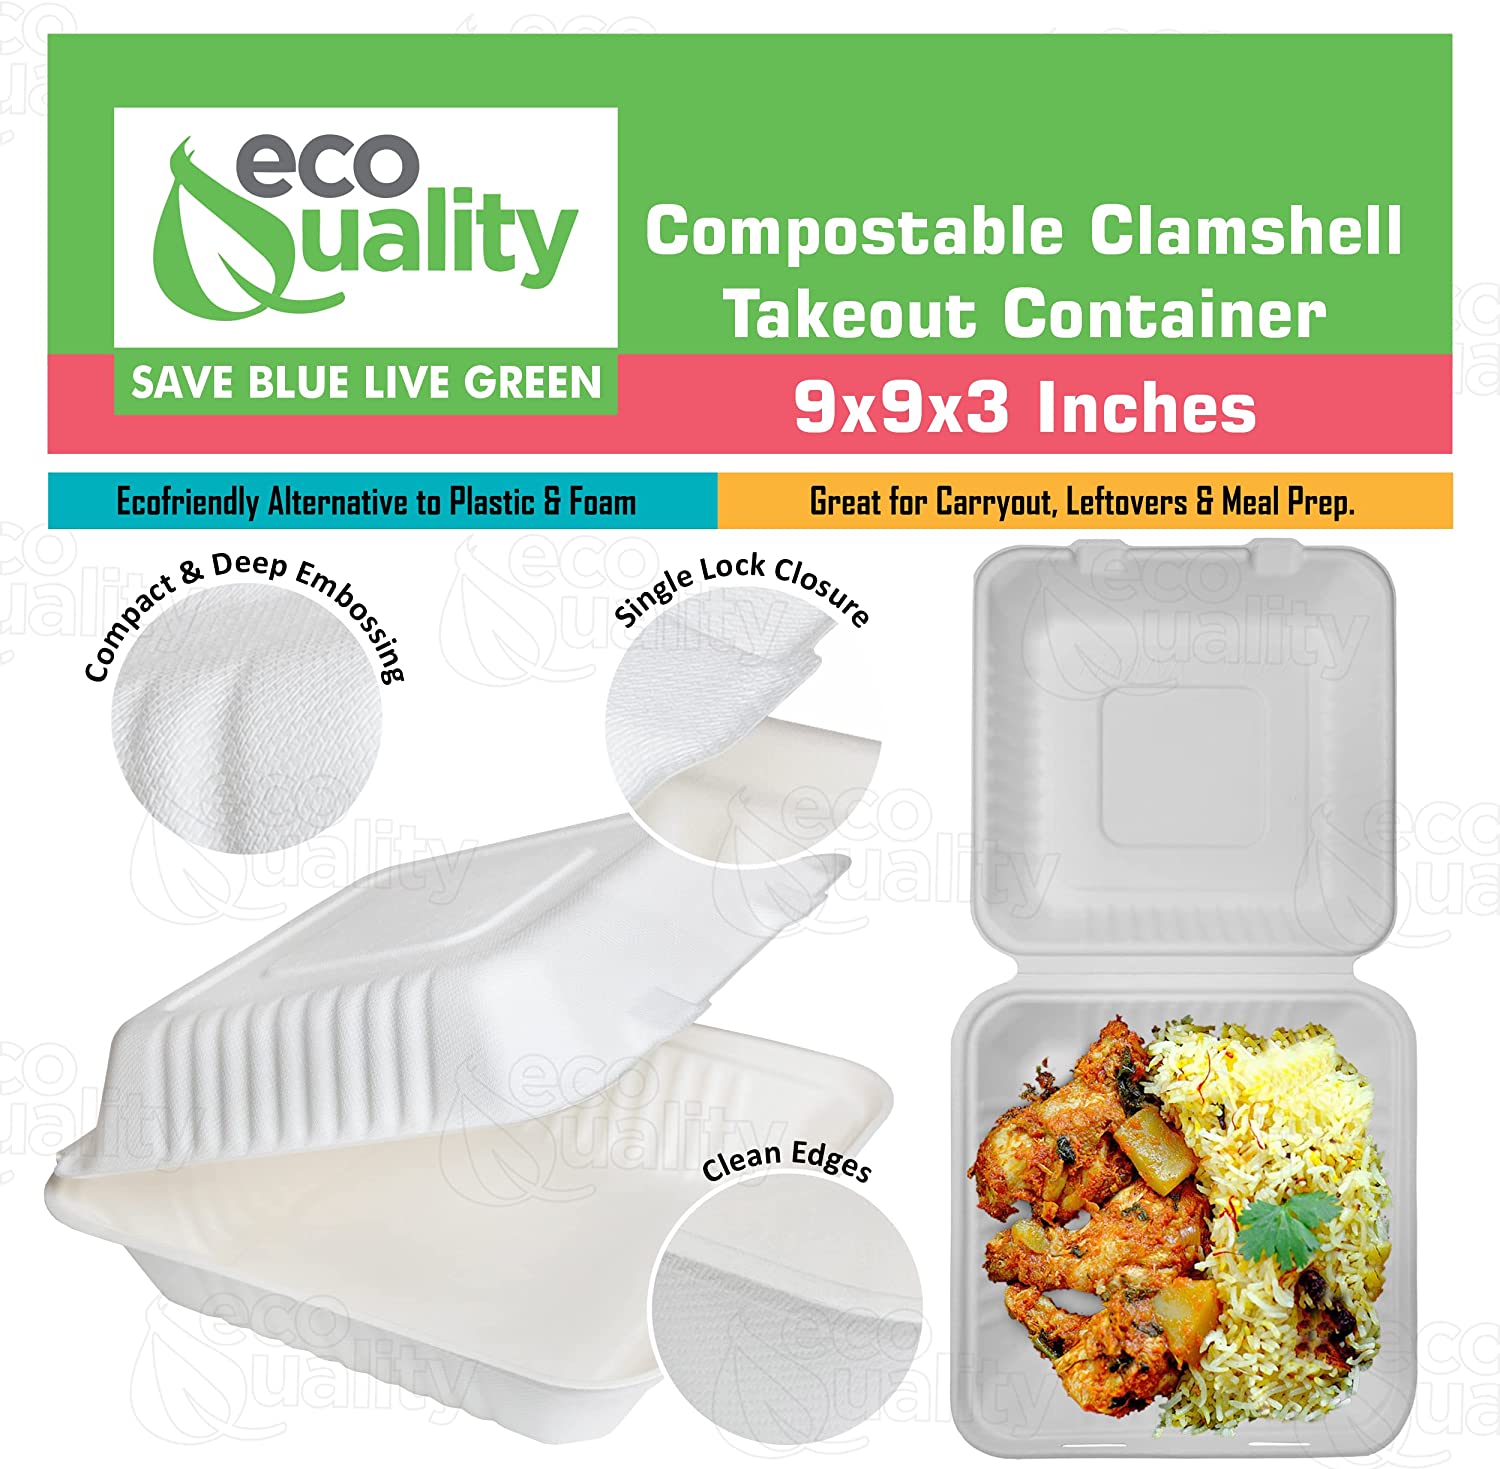 economical wax tree free Tree Free Stackable Square Hinged Clamshell Rice Plates Restaurants Parties Microwaveable Freezer Safe Heavy Duty Grease and Leak Resistant Proof Food Trucks Food Containers foam plastic alternative Ecofriendly Product Compostable Biodegradable Sugarcane Bagasse Clam Shell Take Out Containers carryout leftover mealprep burger box BPA Free 9x9x3 Take Out To Go Box